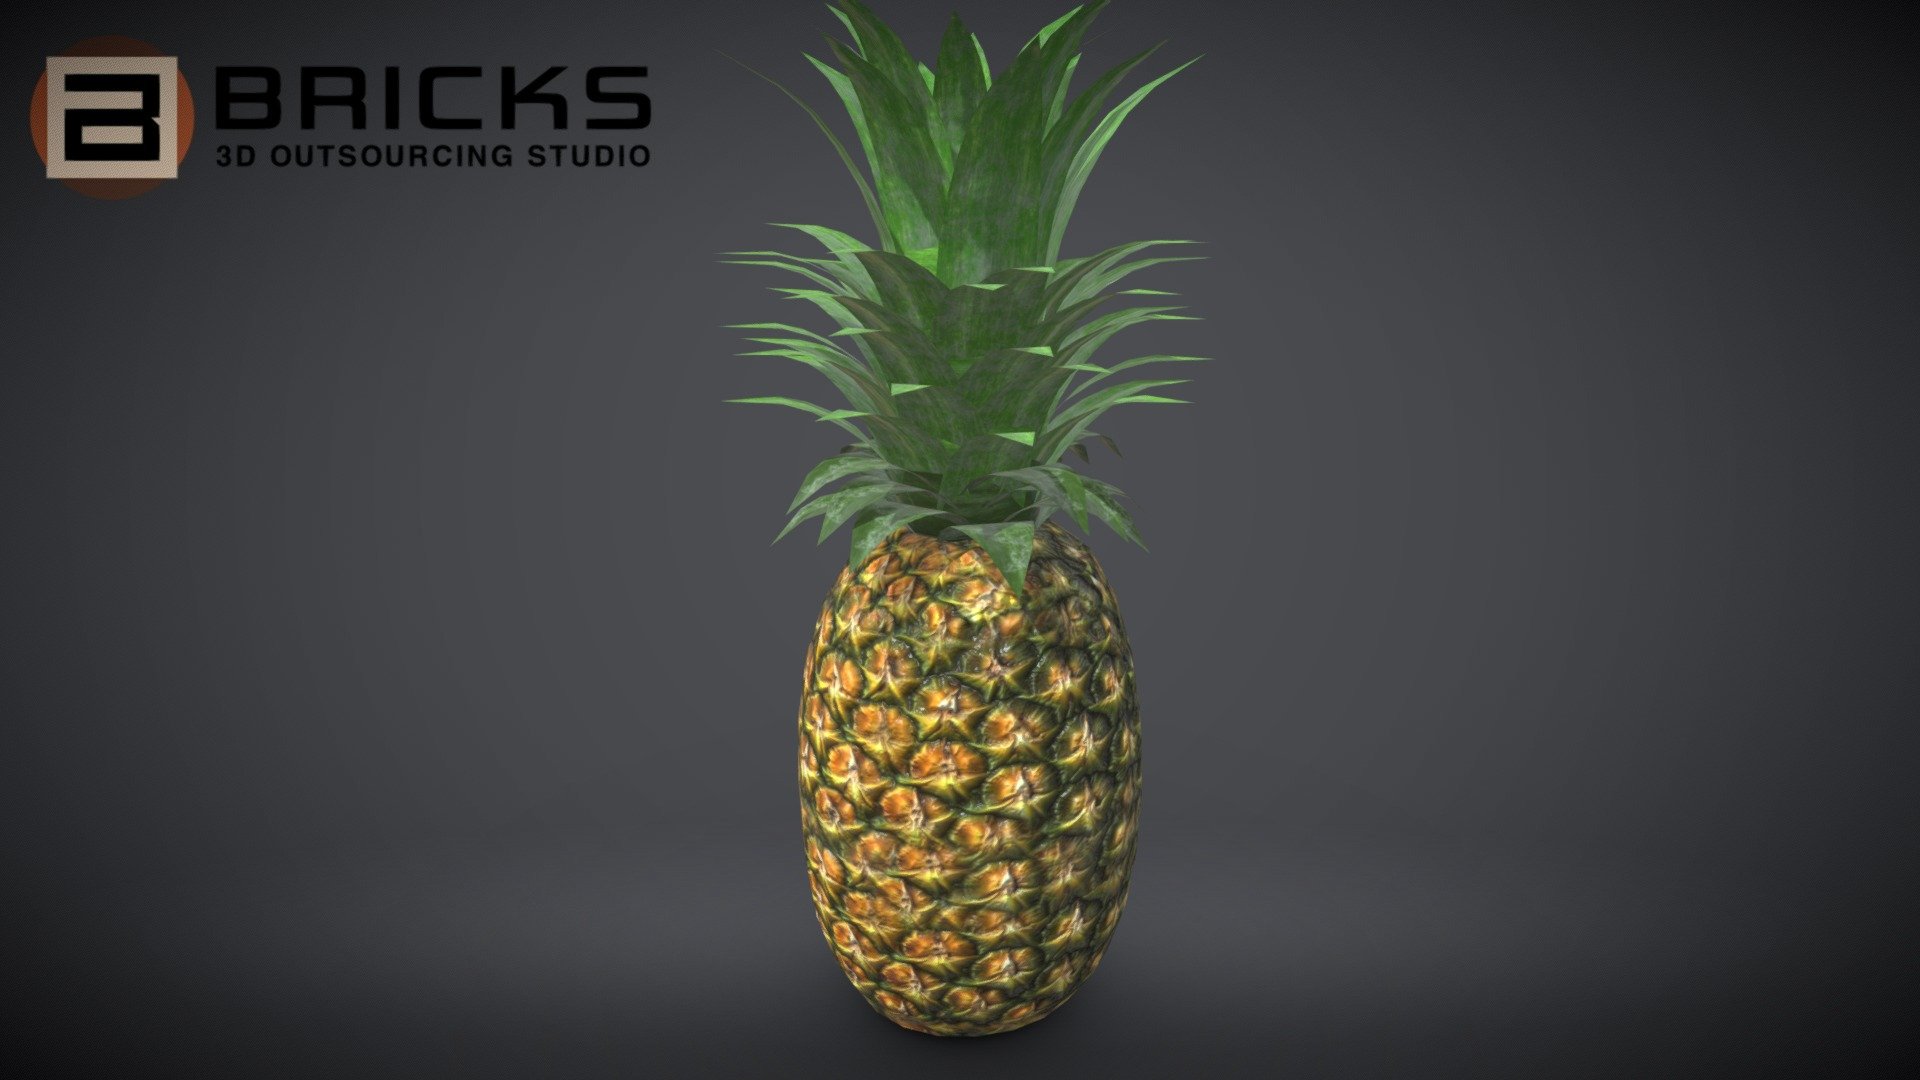 PBR Food Asset:
Pineapple
Polycount: 1556
Vertex count: 1382
Texture Size: 2048px x 2048px
Normal: OpenGL

If you need any adjust in file please contact us: team@bricks3dstudio.com

Hire us: tringuyen@bricks3dstudio.com
Here is us: https://www.bricks3dstudio.com/
        https://www.artstation.com/bricksstudio
        https://www.facebook.com/Bricks3dstudio/
        https://www.linkedin.com/in/bricks-studio-b10462252/ - Pineapple - Buy Royalty Free 3D model by Bricks Studio (@bricks3dstudio) 3d model